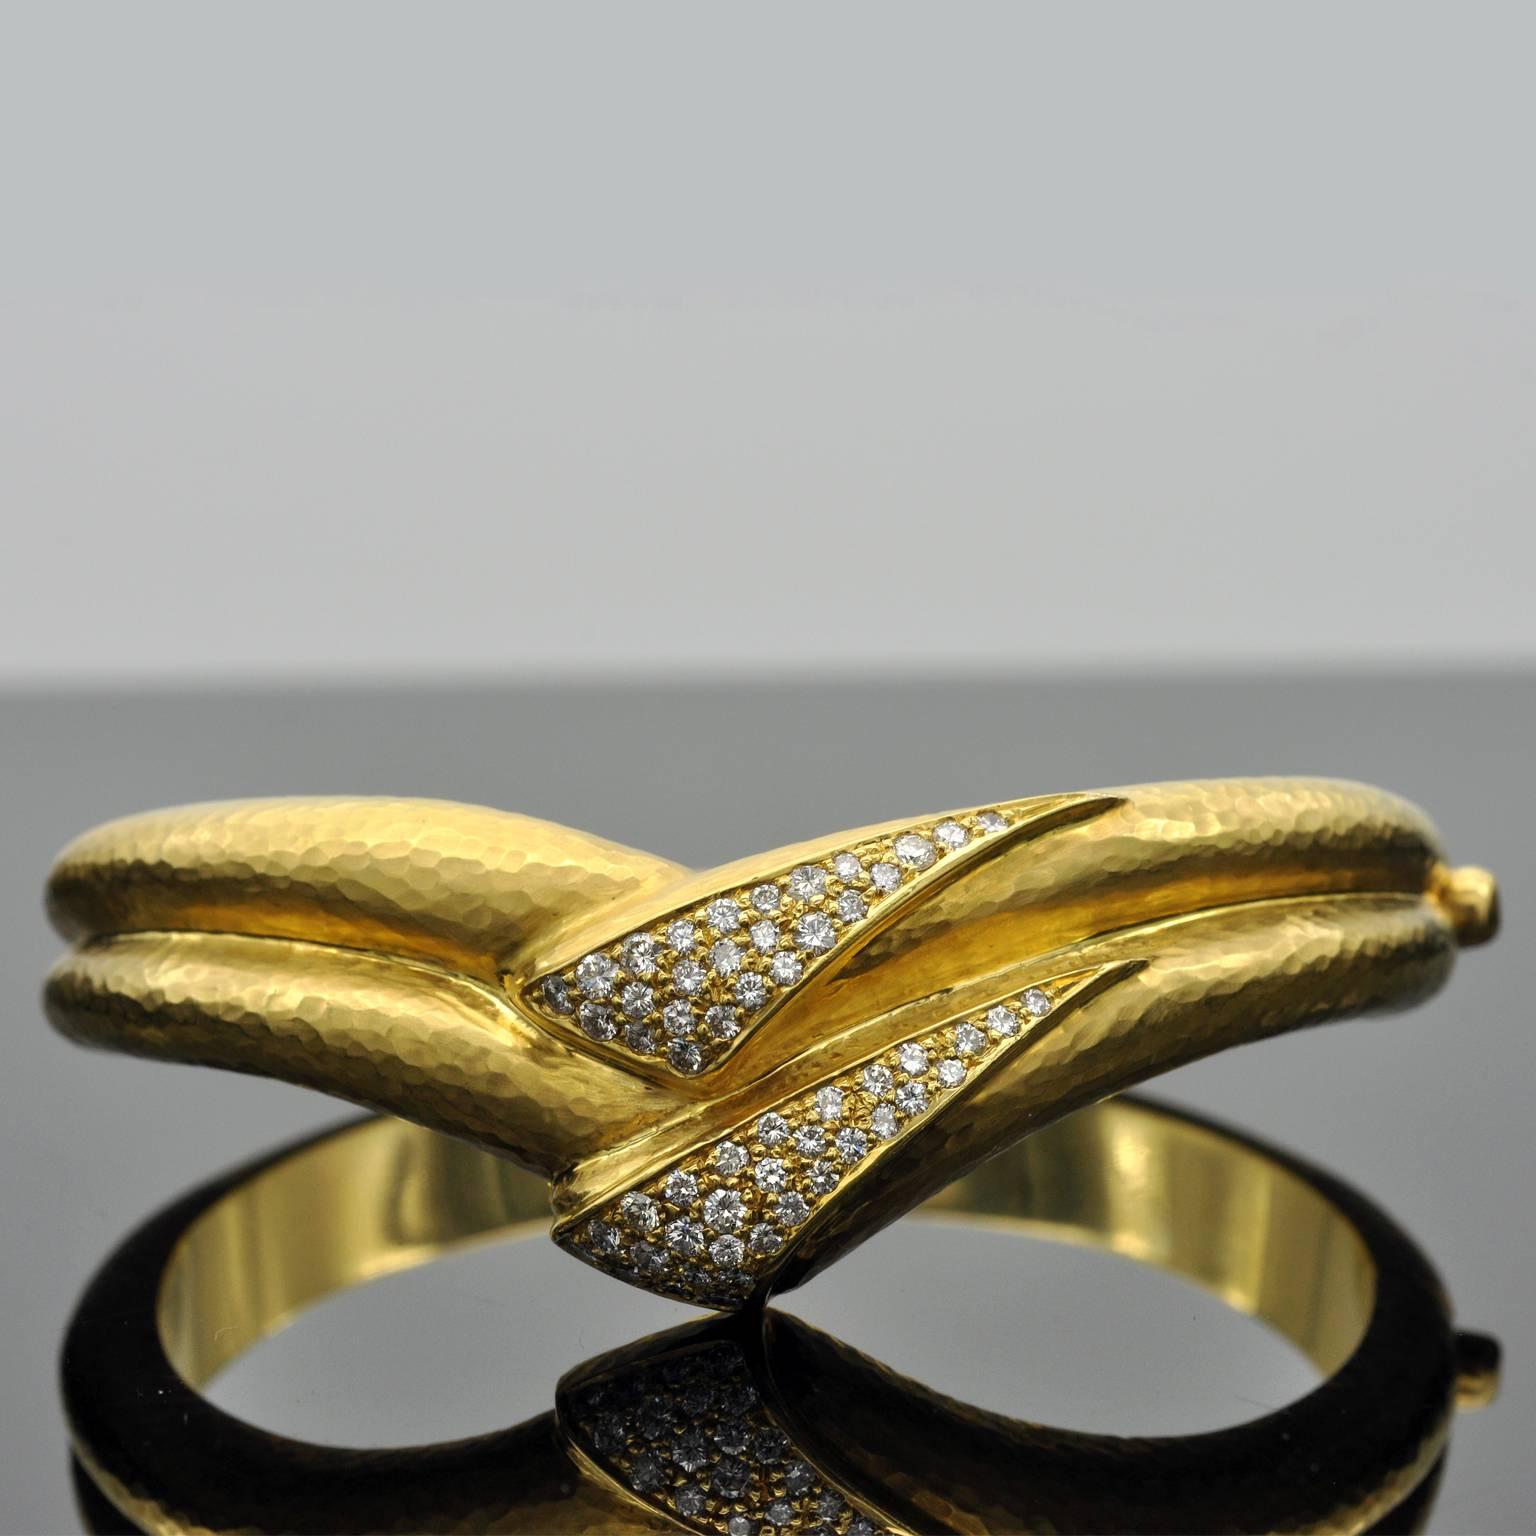 Exclusive cuff bracelet. A double band of 18 kt hand hammered yellow gold form a v-shaped central motif set with round brilliant cut diamonds. It is extremely well made: you can barely see the hinge; It smooth an pleasant in hand and sits perfectly